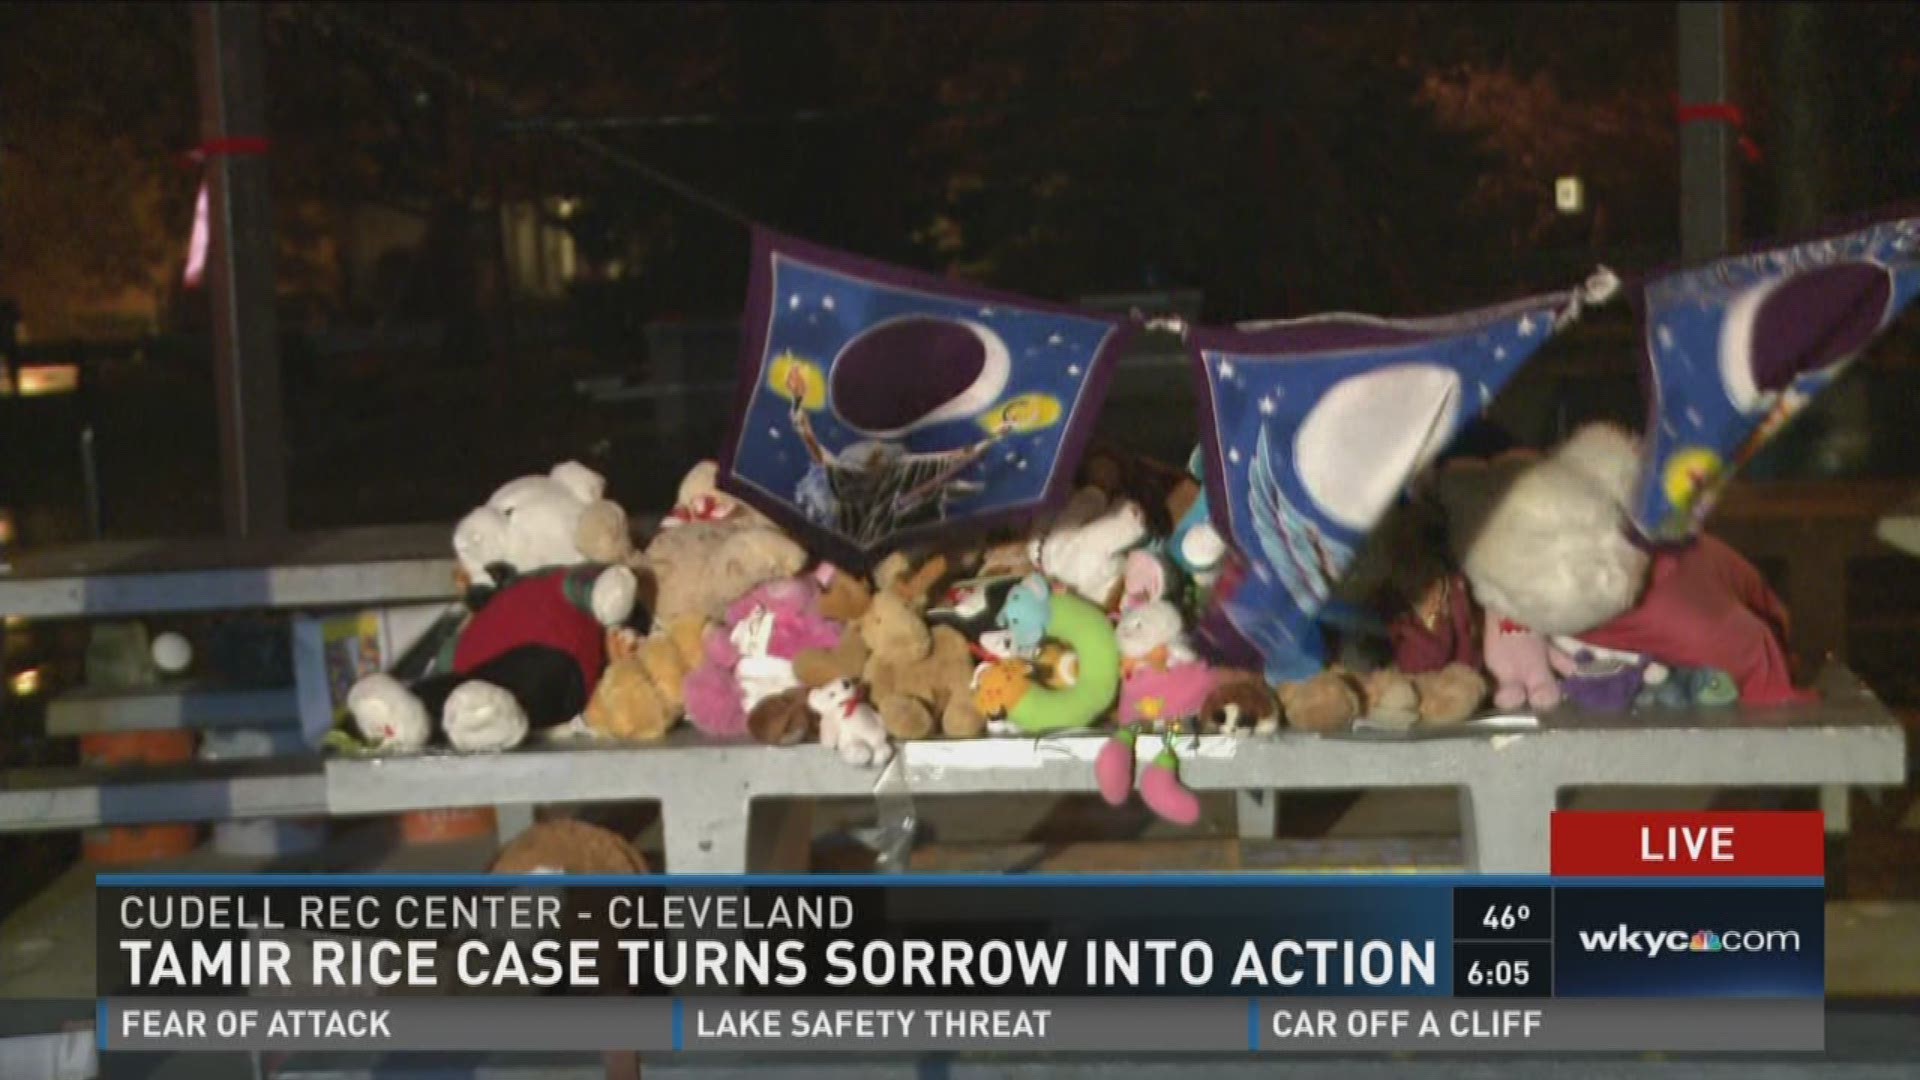 Tamir Rice case turns sorrow into action